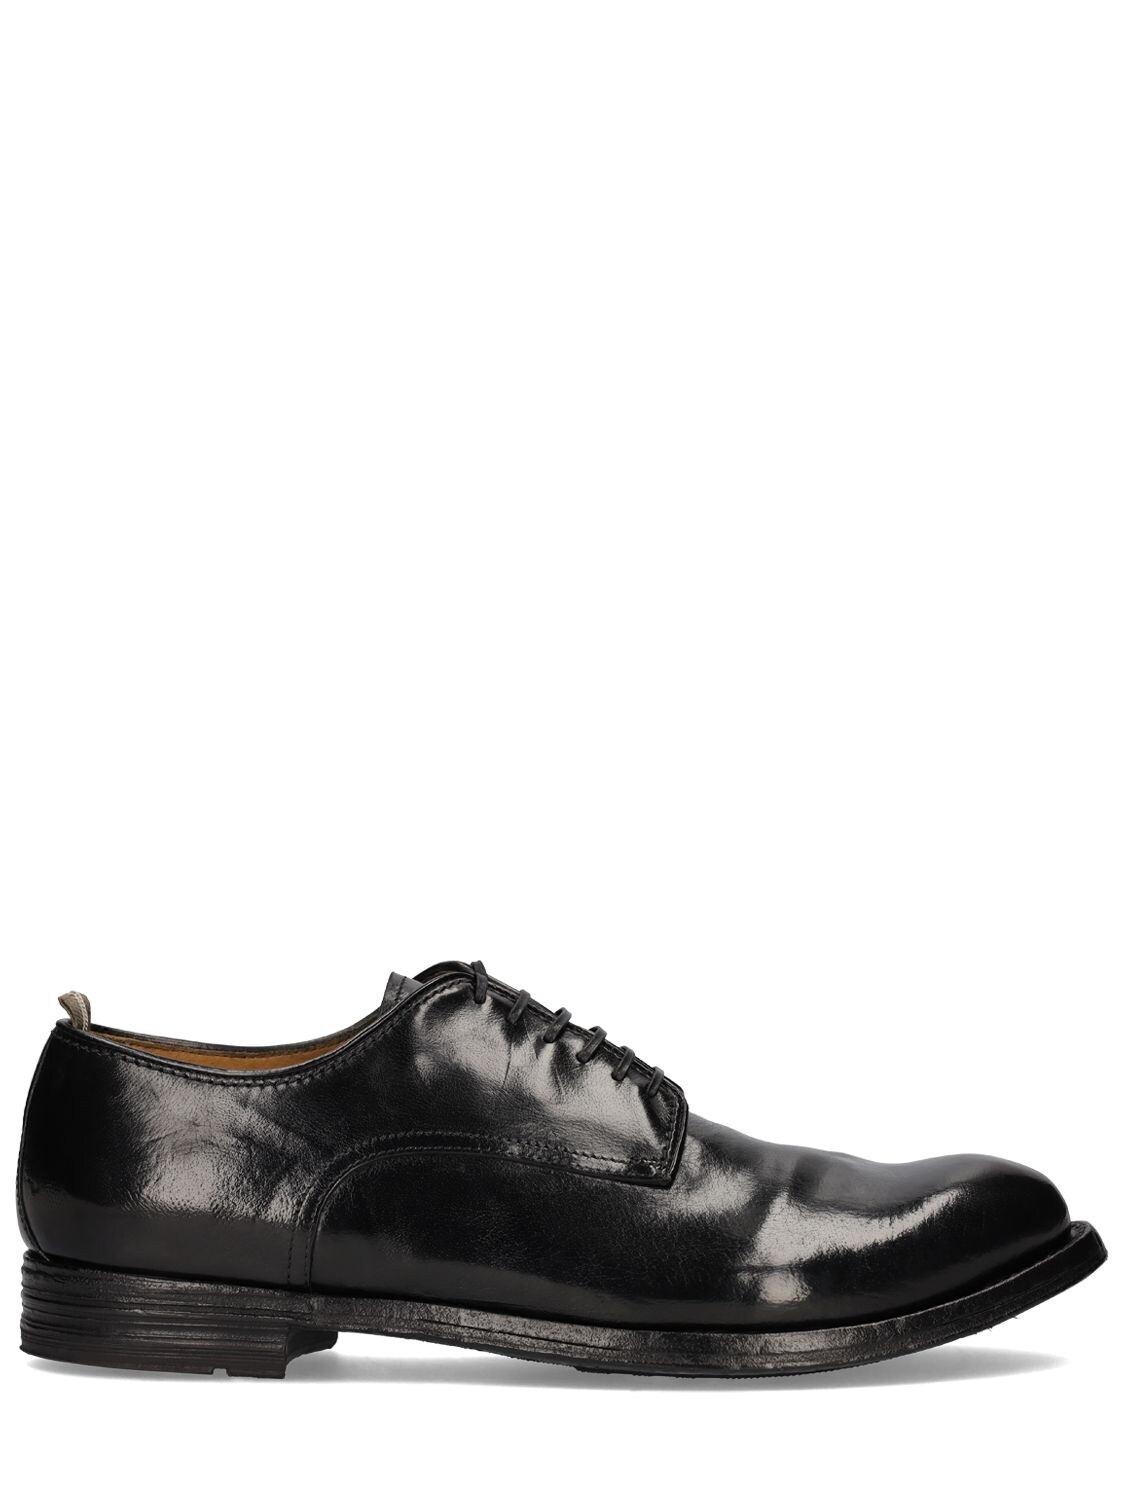 OFFICINE CREATIVE ANATOMIA LEATHER DERBY LACE-UP SHOES